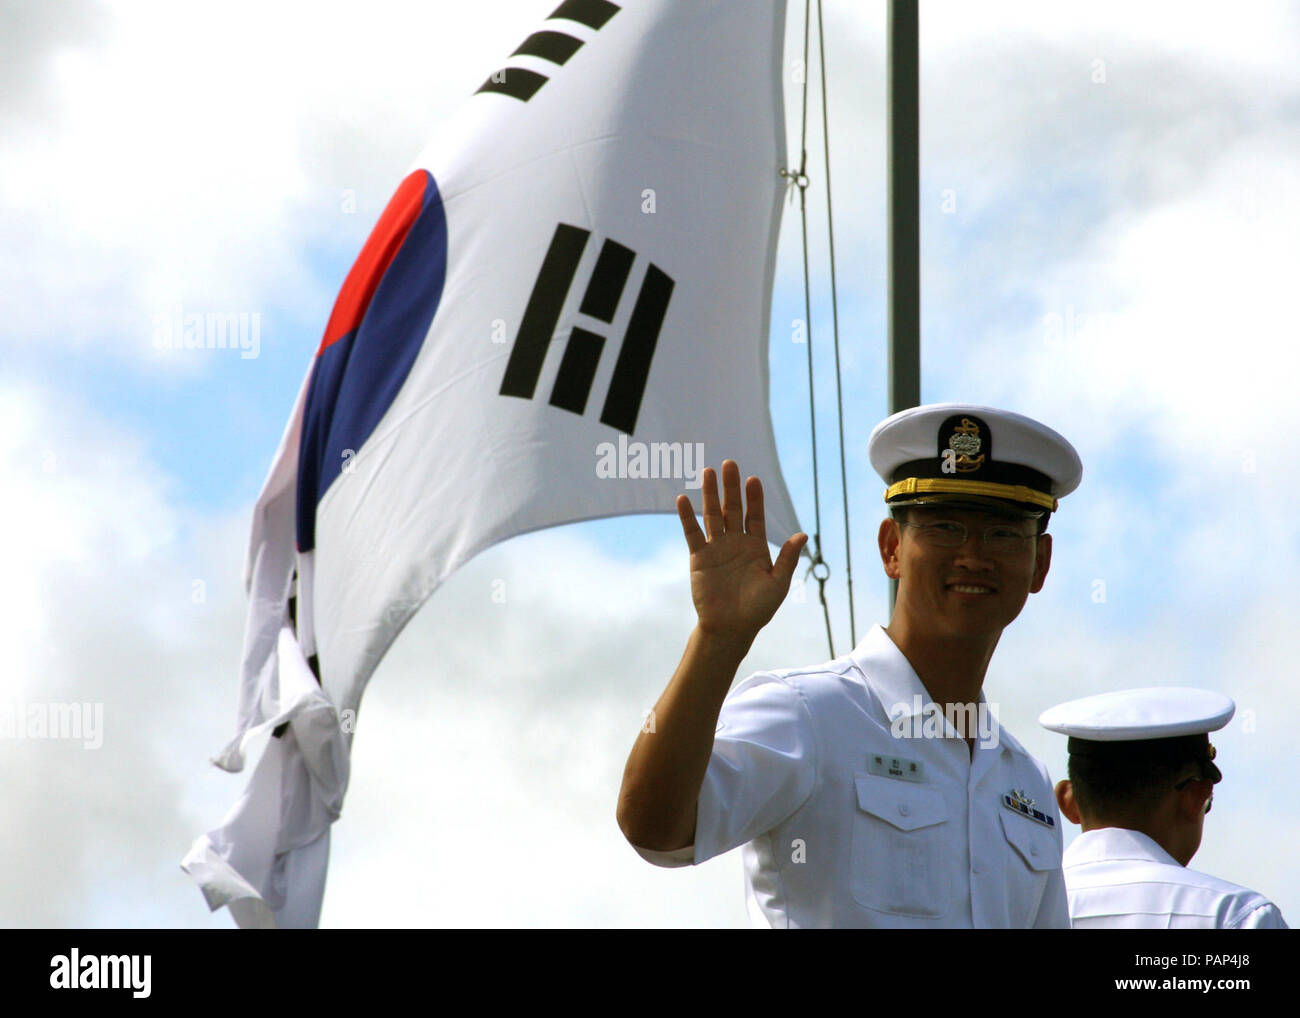 A South Korean navy petty officer. A Republic of Korea sailor, onboard the destroyer ROKS Munmu the Great (DDH 976), waves to onlookers pier side shortly after the ship, along with ROKS Yang Manchoon (DDH 973), arrived at Naval Station Pearl Harbor, Hawaii, June 24, 2008, during the Rim of the Pacific (RIMPAC) 2008 exercise. RIMPAC, the world's largest multinational exercise, is scheduled biennially by the U.S. Pacific Fleet. Participants included the United States, Australia, Canada, Chile, Japan, the Netherlands, Peru, Republic of Korea, Singapore, and the United Kingdom. This year Stock Photo